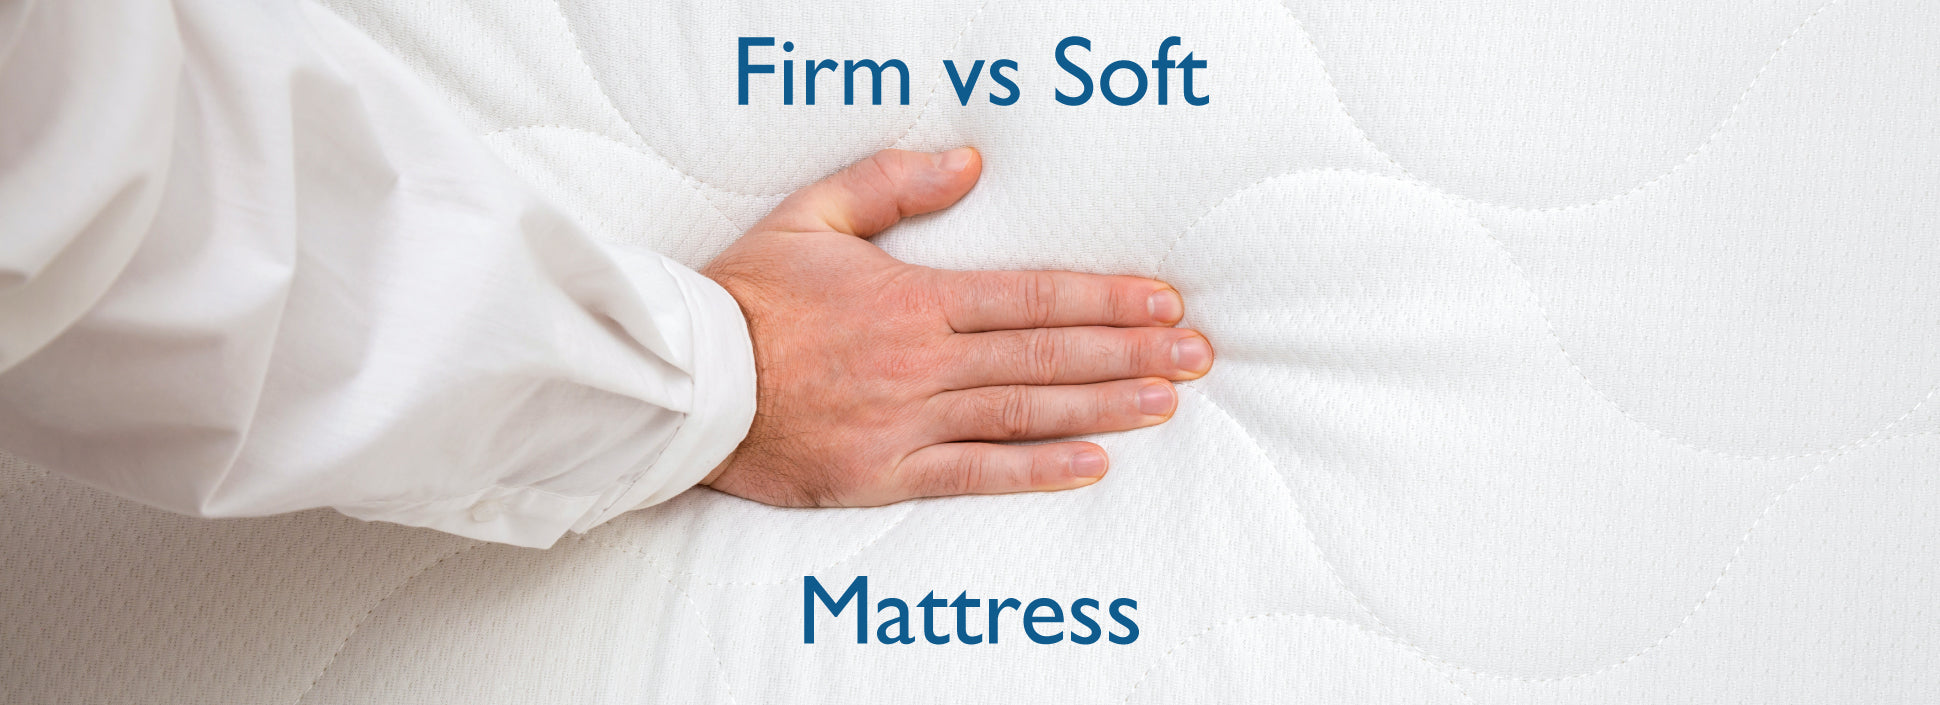 Firm or Soft Mattresses: Which is Right For You?